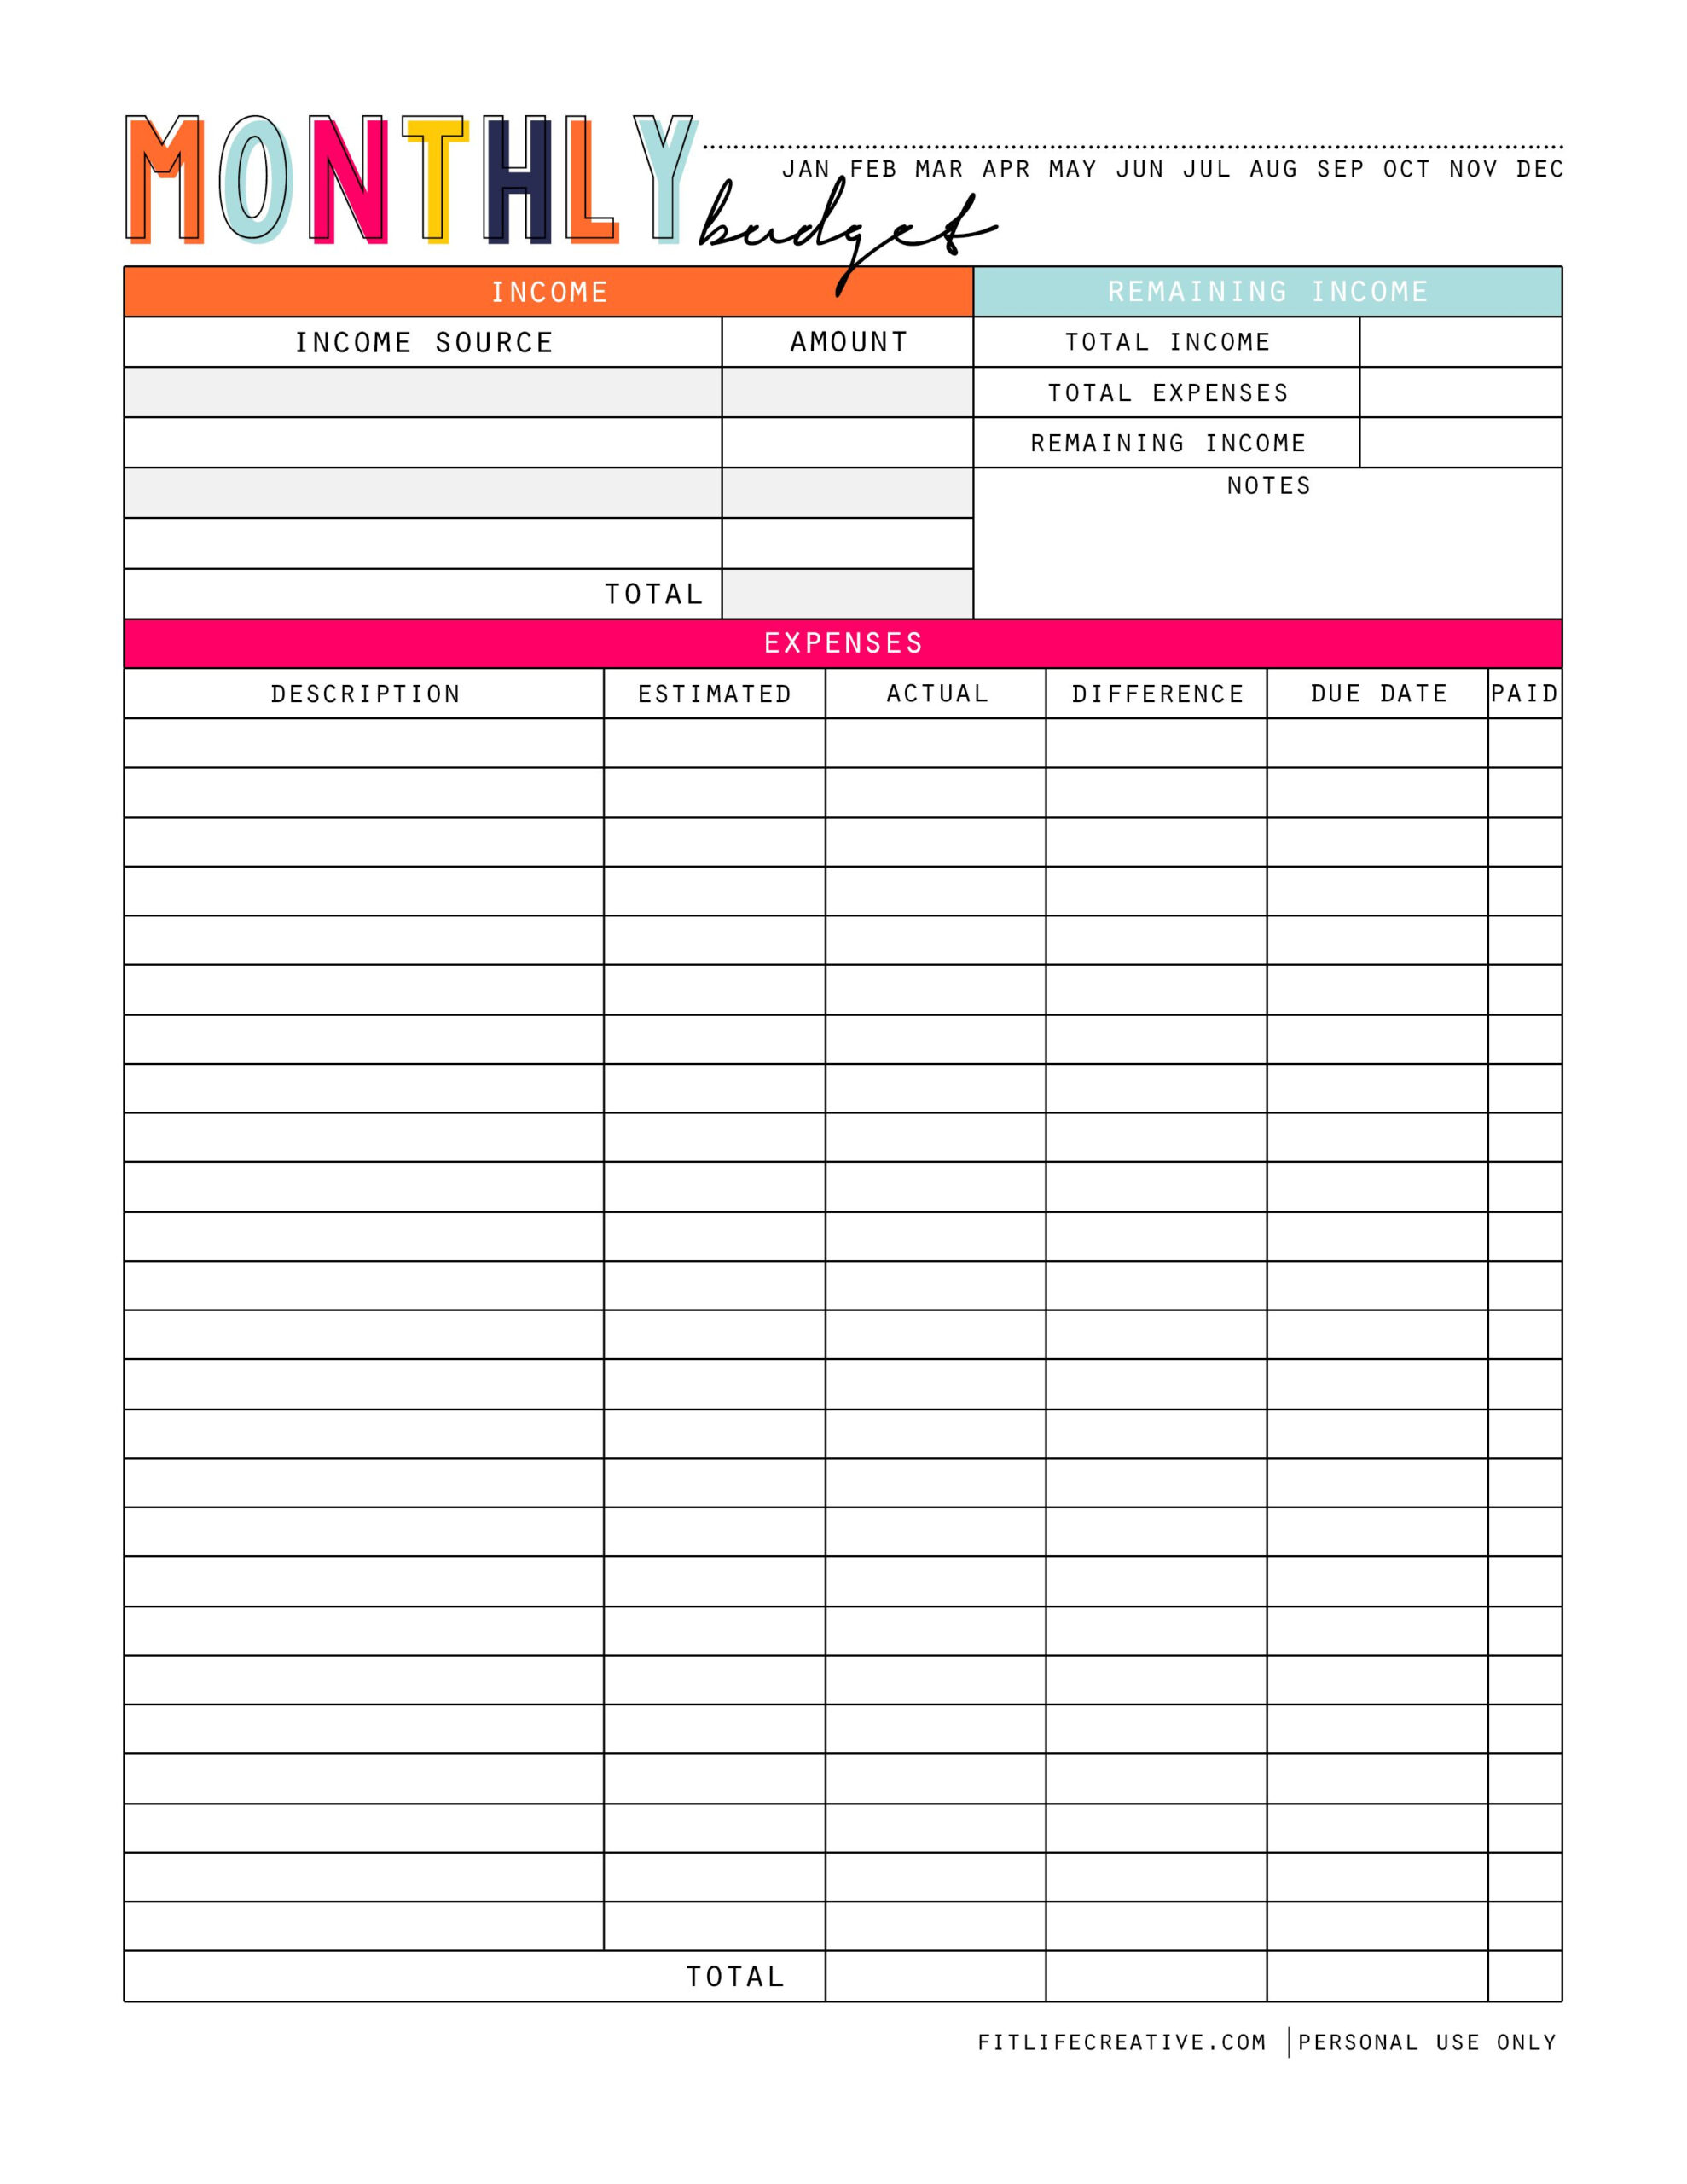 Low Income Budget Beginner Printable Budget Worksheet PINCOMEQ